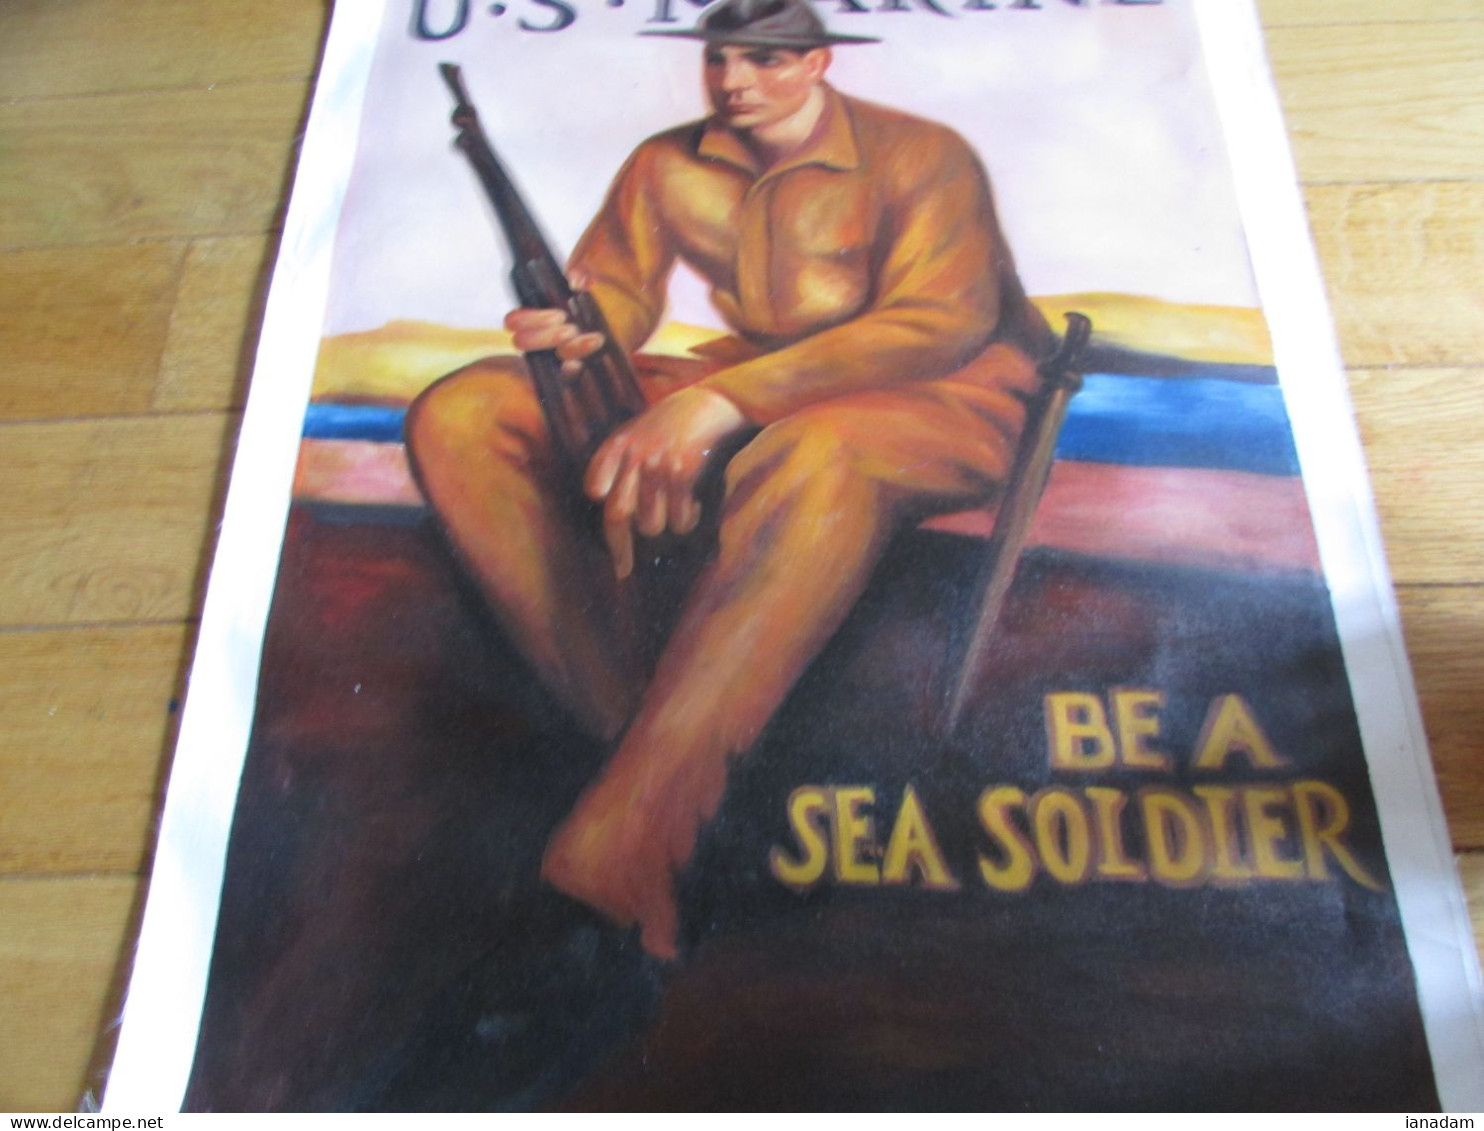 WW1 US Marine Corp Oil Painting Poster - 1914-18